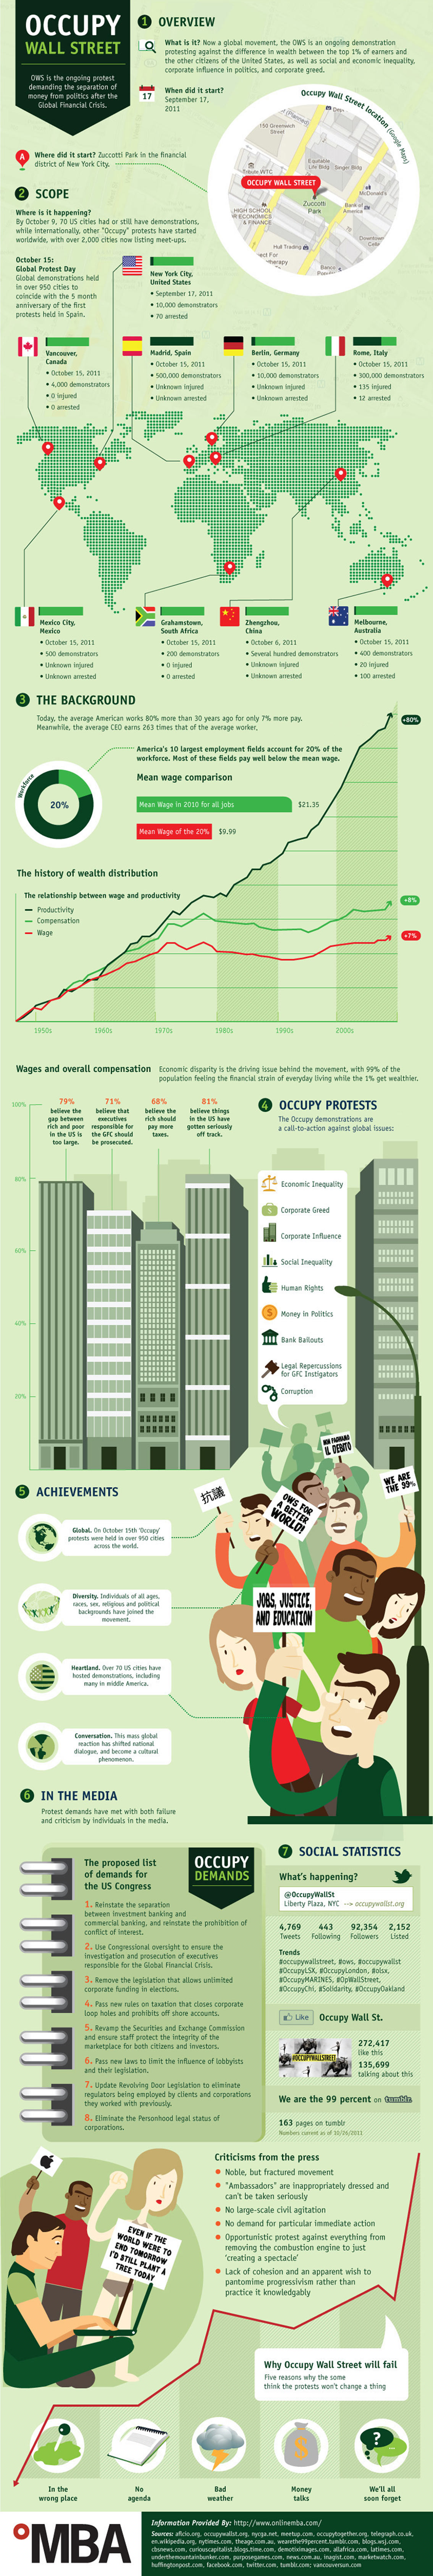 Occupy Wall street Protest Infographic